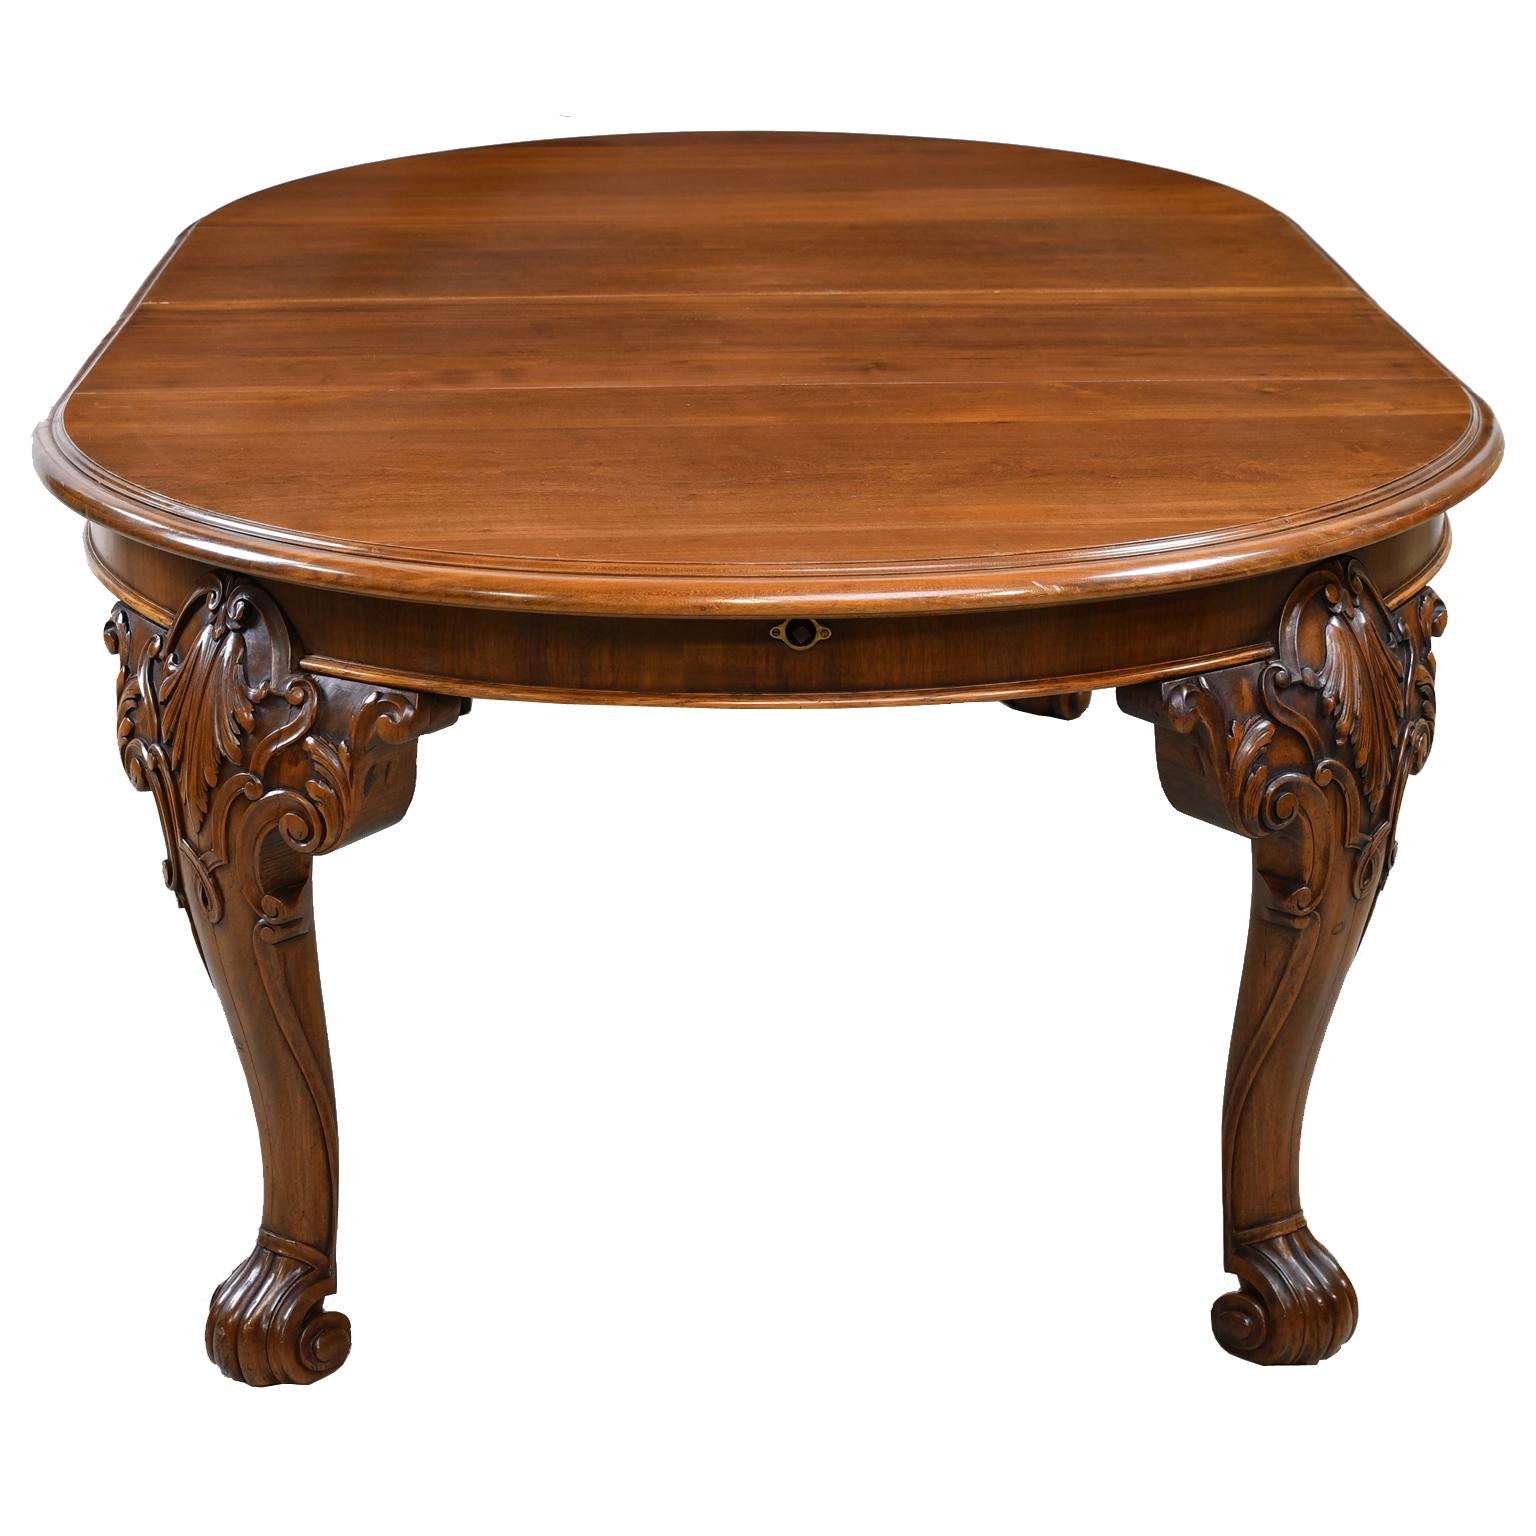 Hand-Crafted American Victorian Solid Walnut Crank Dining Table w/ 3 Skirted Leaves, c 1870 